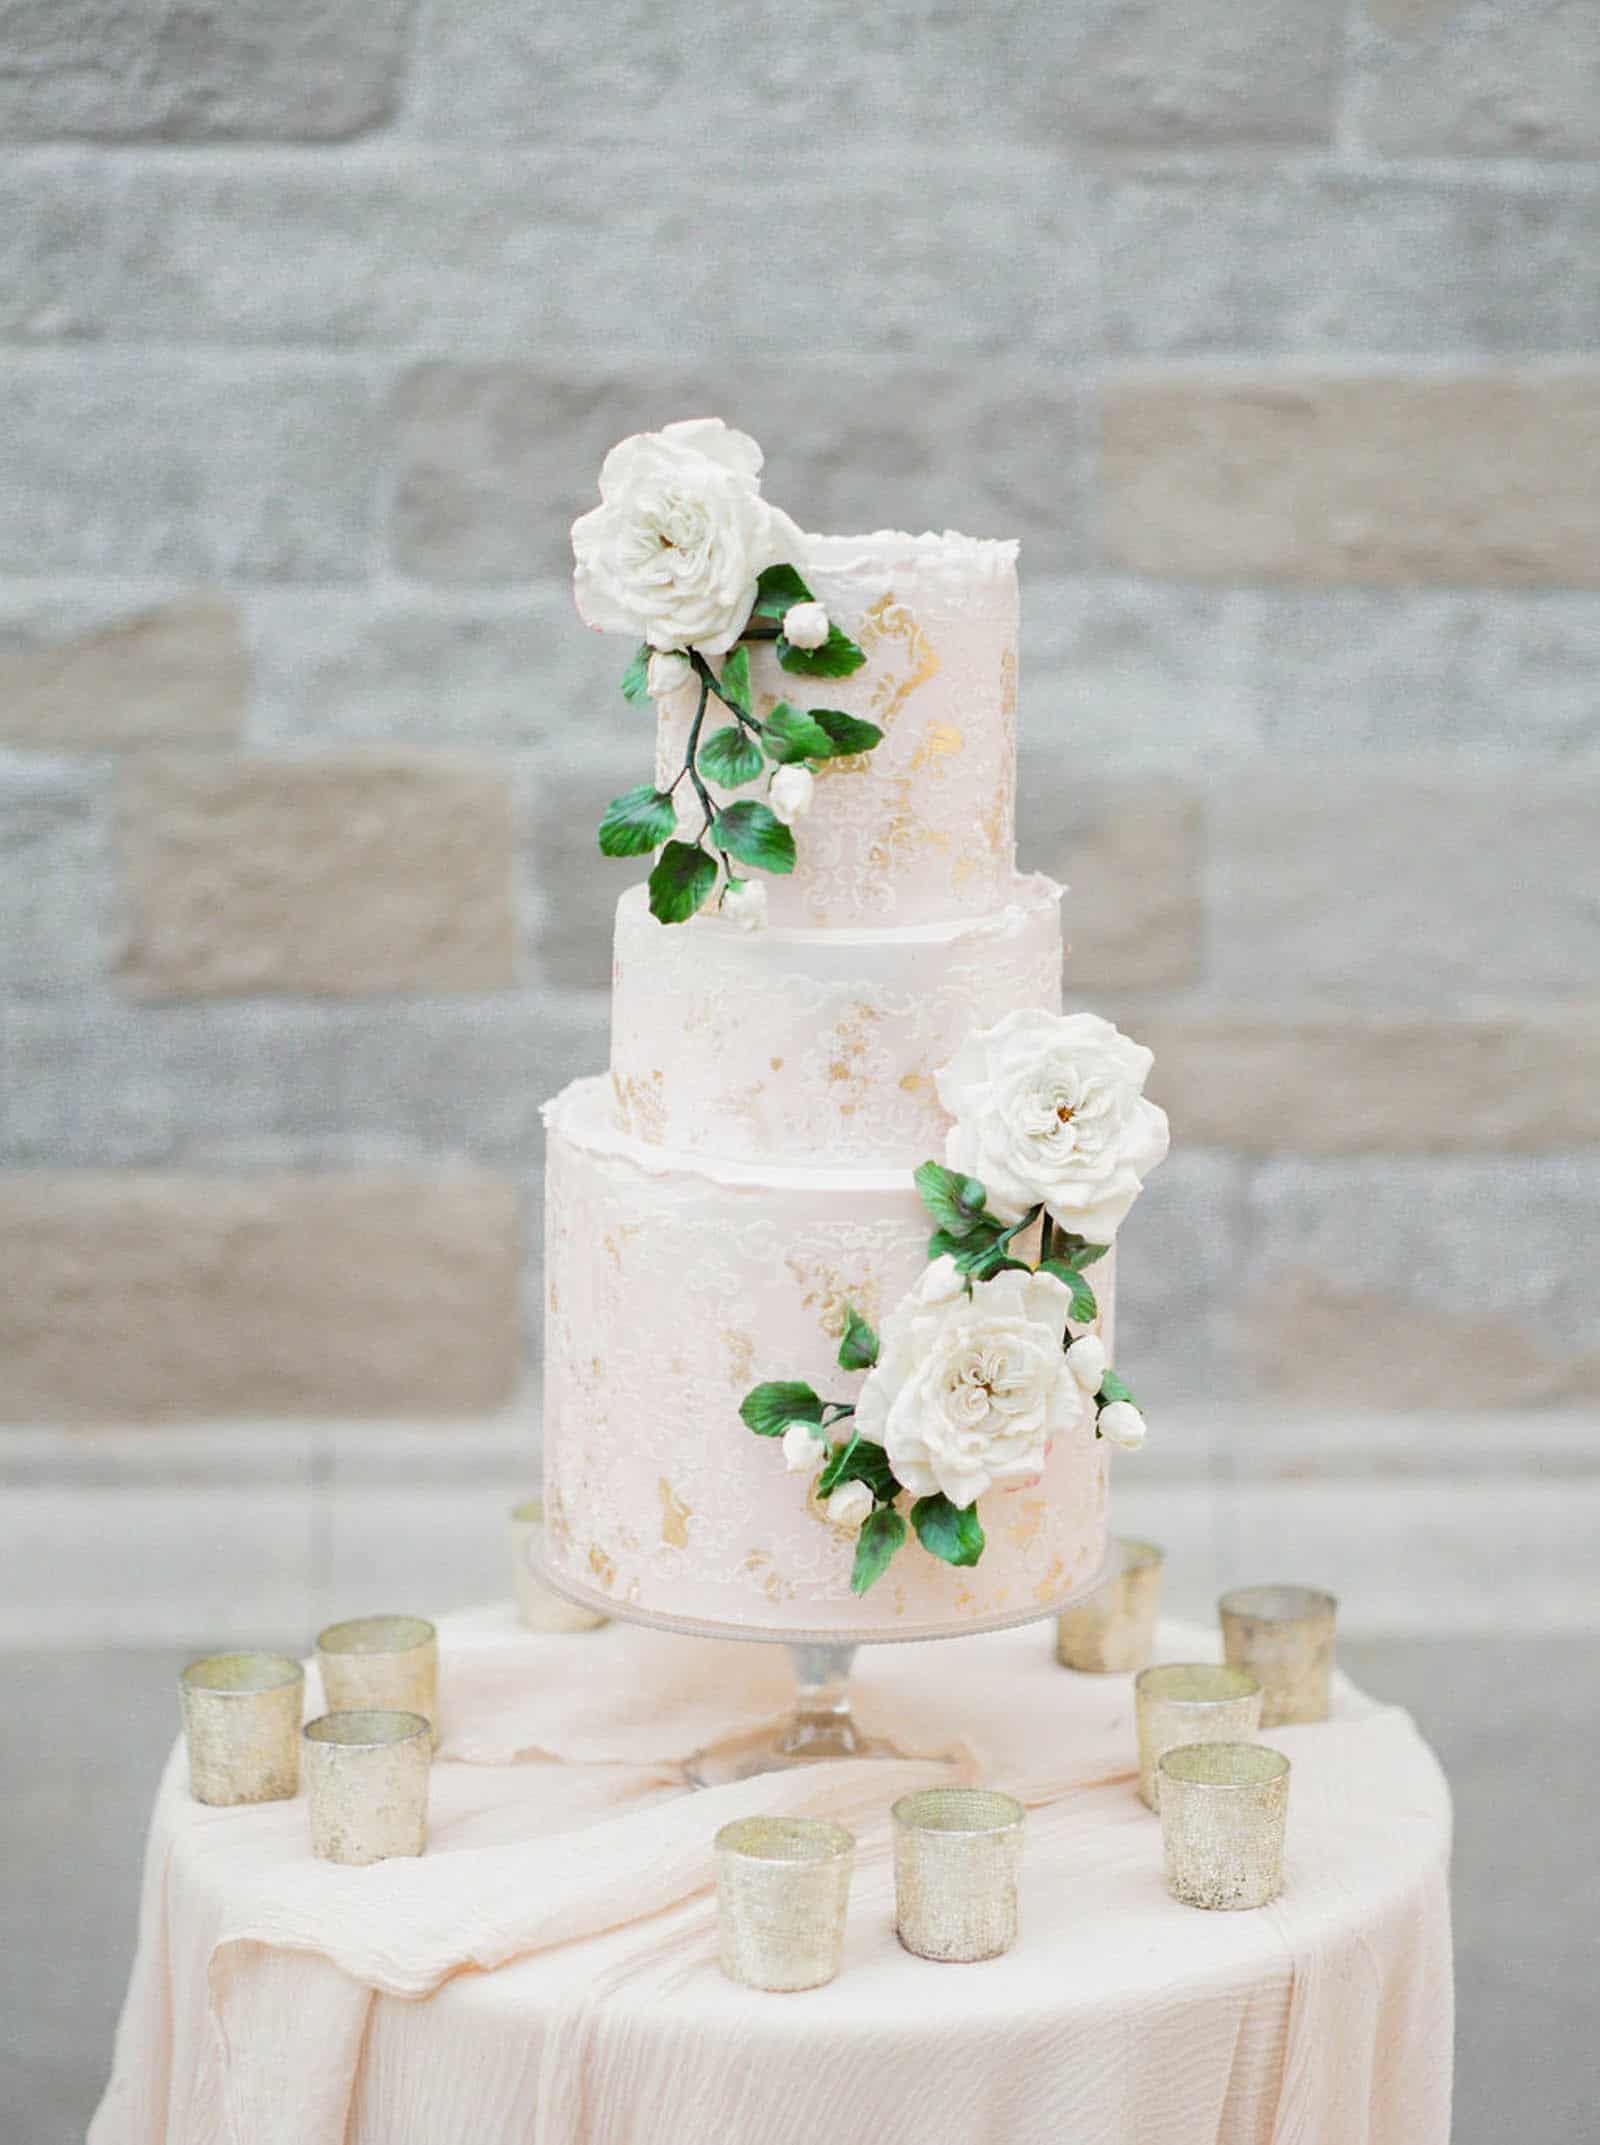 Fairytale Wedding Cake in Pink and Gold at Villa Commenda by Tuscan Wedding Cakes